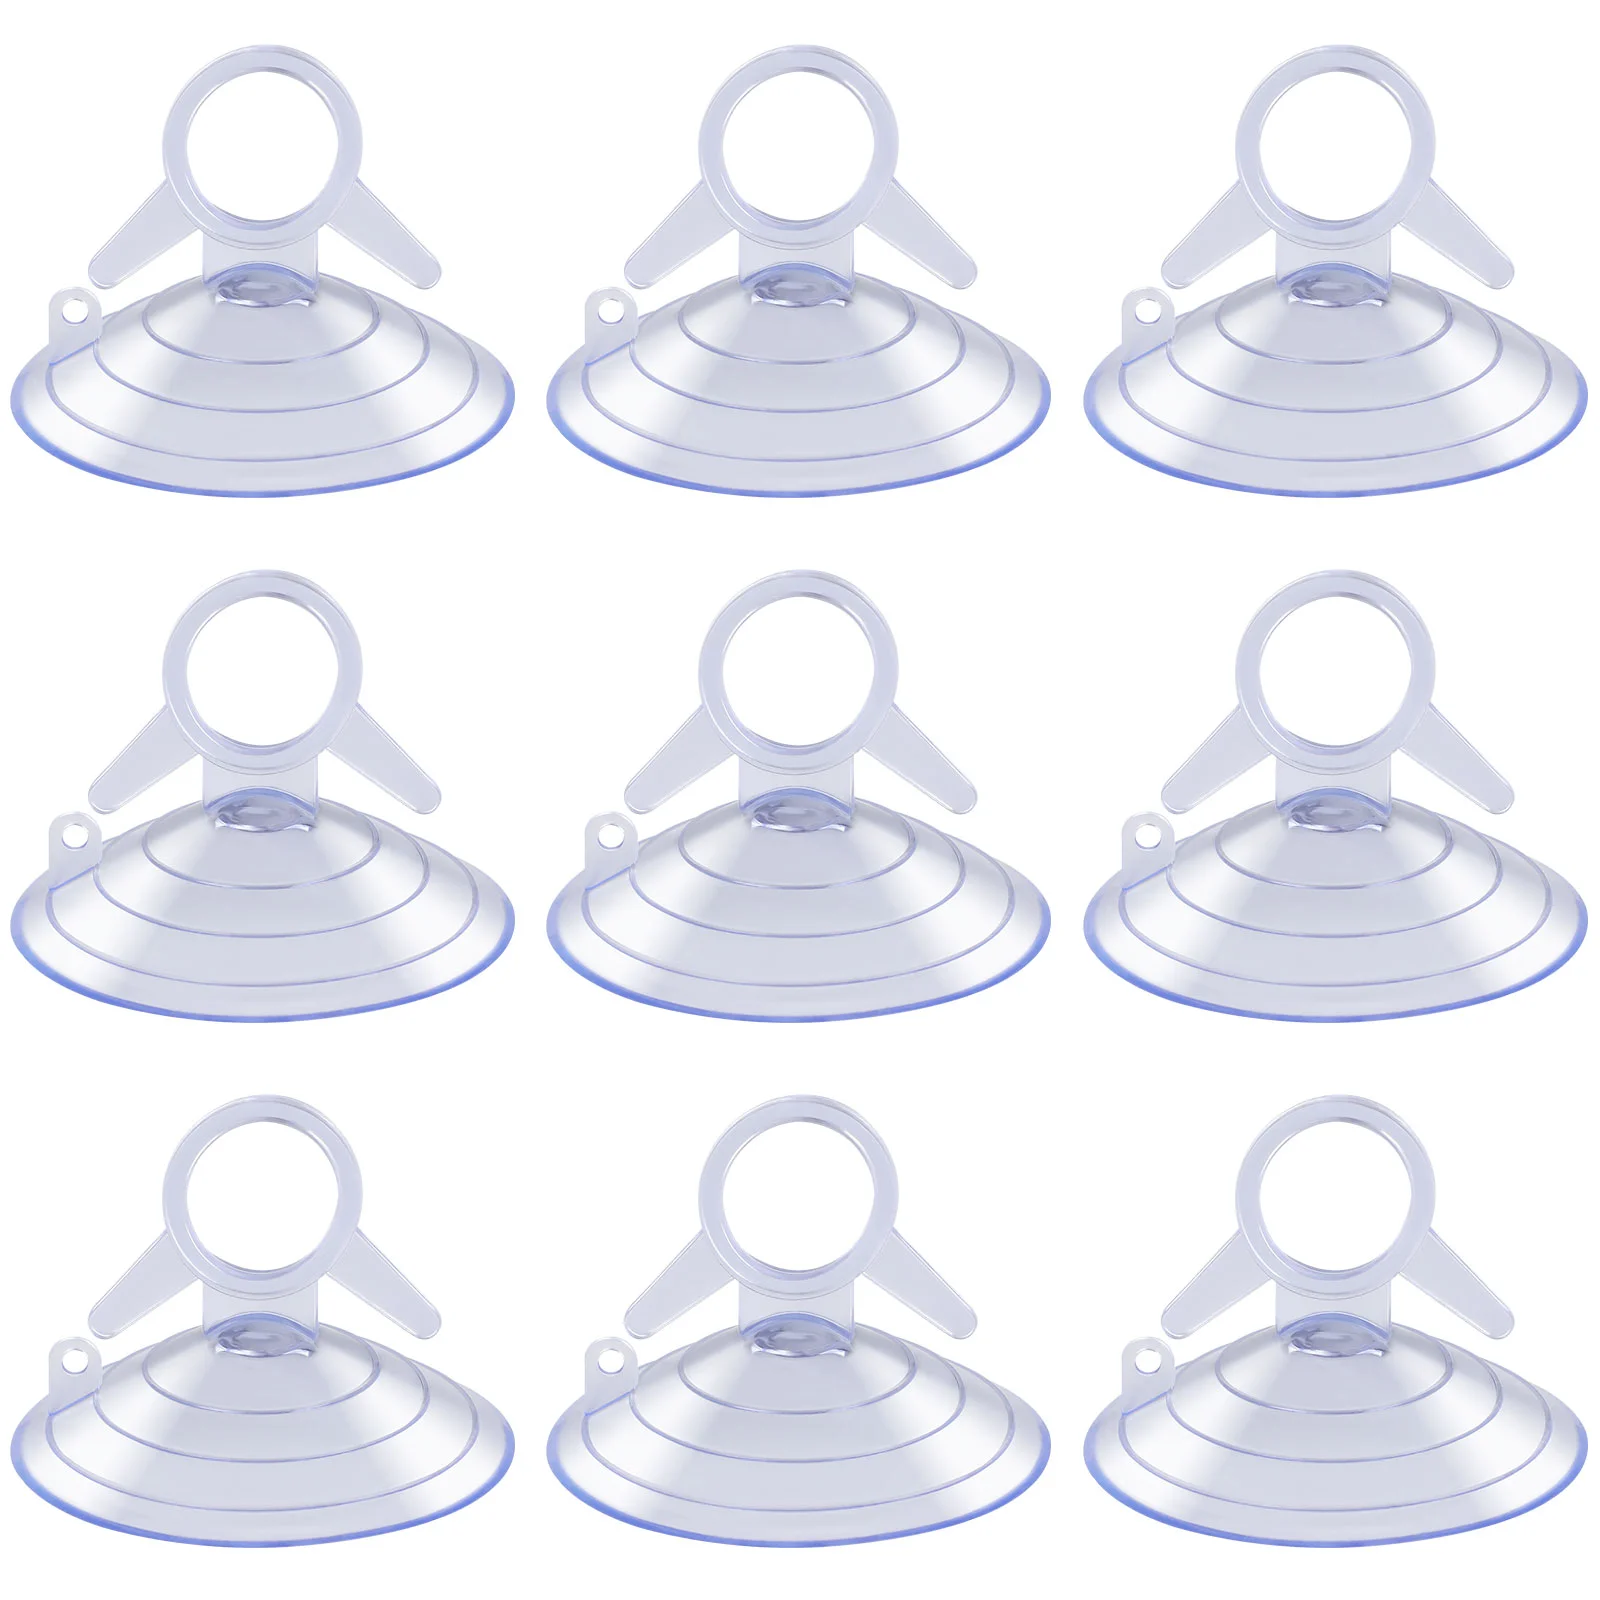 

12 Pcs Pull Ring Sucker Aquarium Suction Cups Fish Tank Suction Cup Swallowtail Fish Tank Accessories Vacuum Suction Cups